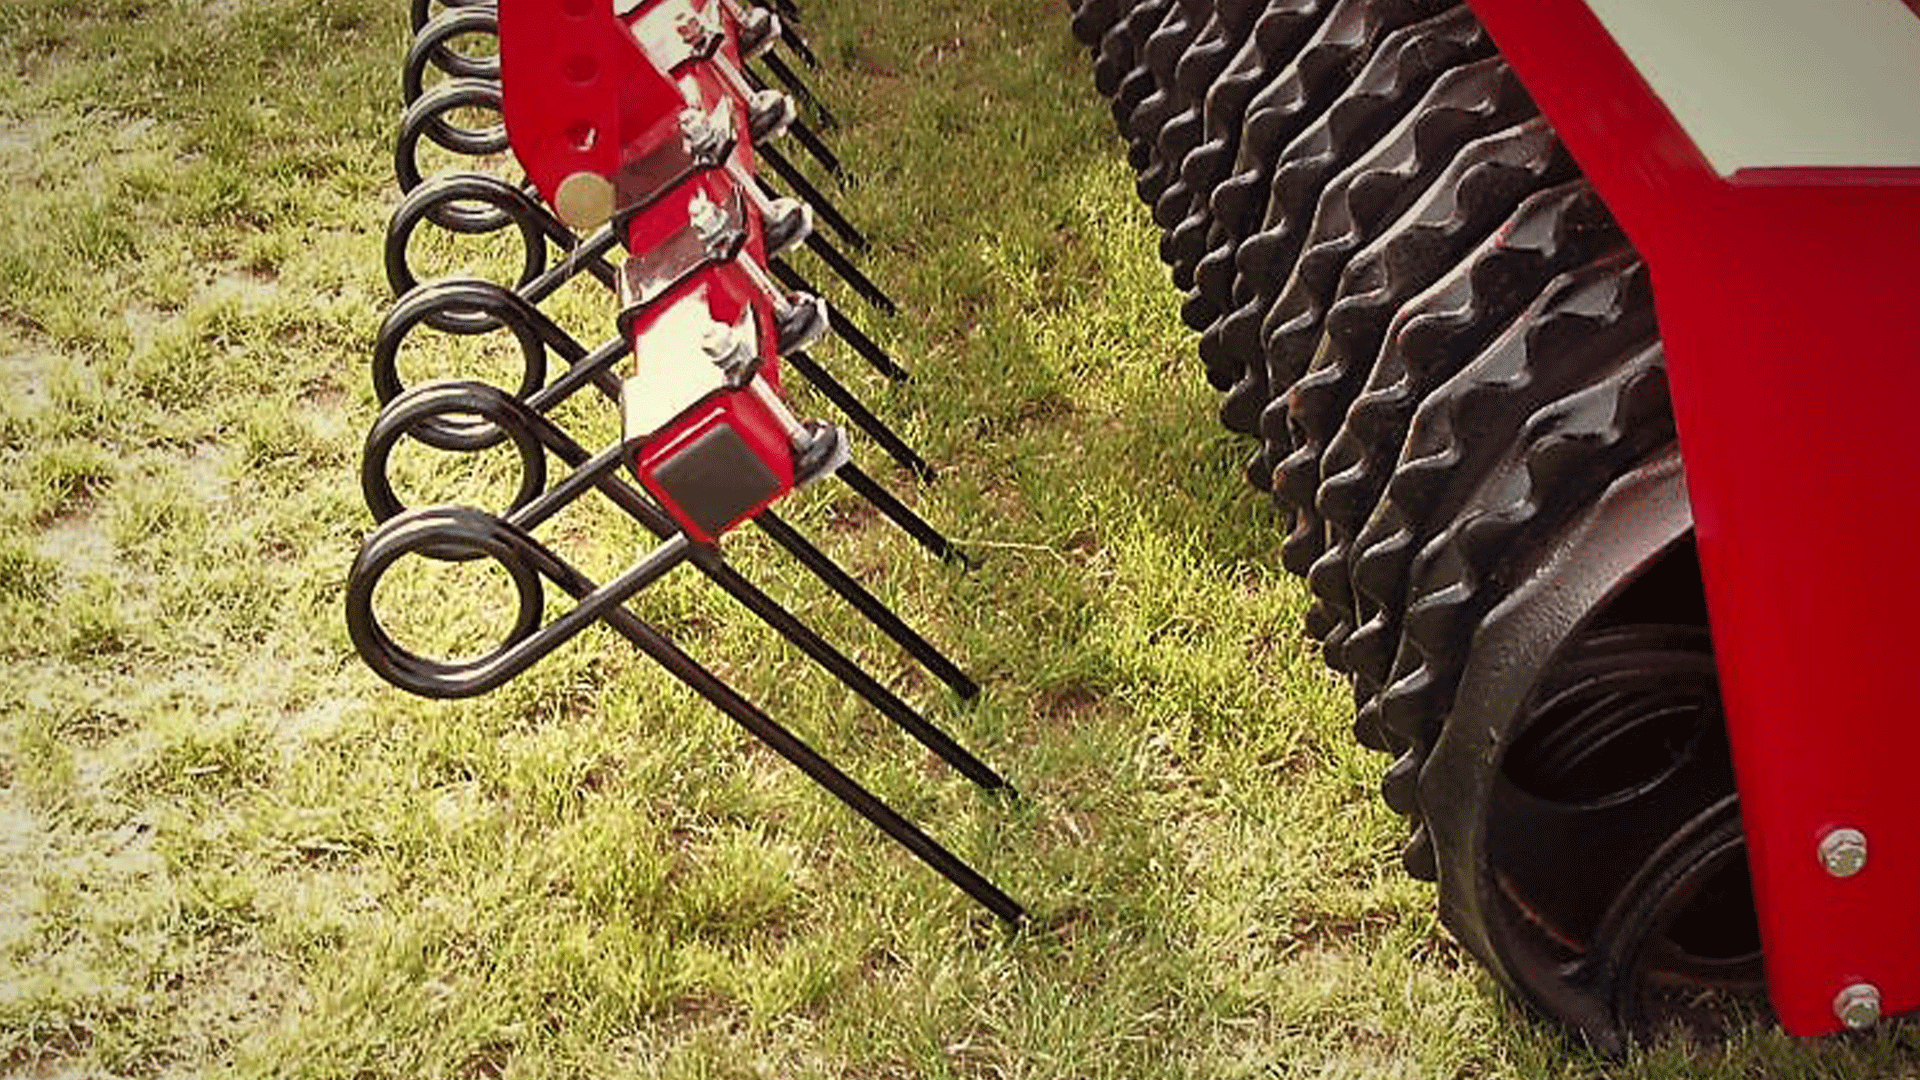 Long-finger tines are suitable for a slight loosing of the surface, leveling og damages from wheels and molehills. The long-finger tines have also proved very efficient for distribution of plant residues after the harrow and for loosening and distributing withered grass during consolidation of grassland in the spring season.